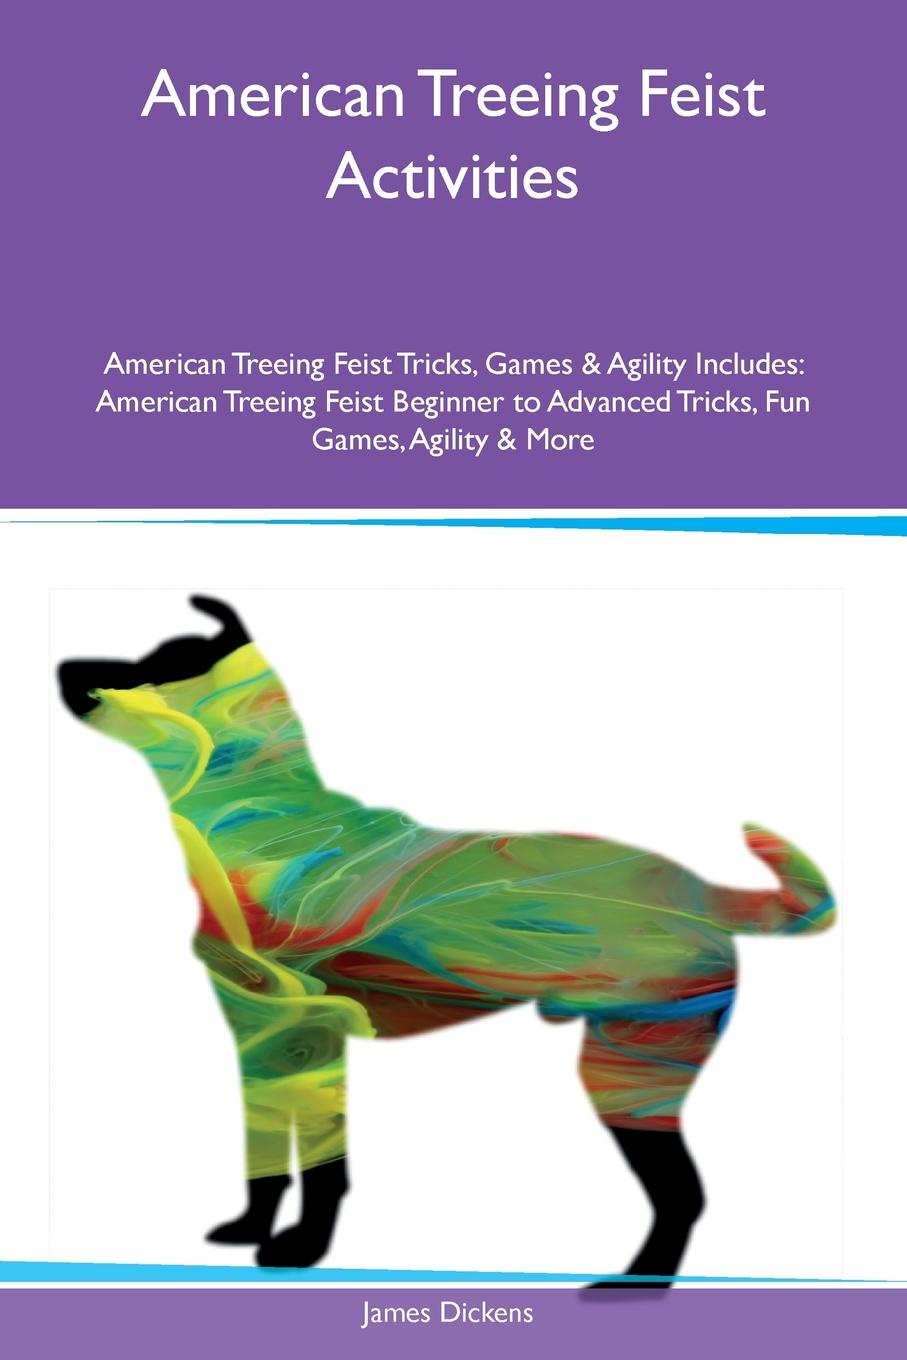 American Treeing Feist Activities American Treeing Feist Tricks, Games & Agility Includes. American Treeing Feist Beginner to Advanced Tricks, Fun Games, Agility & More